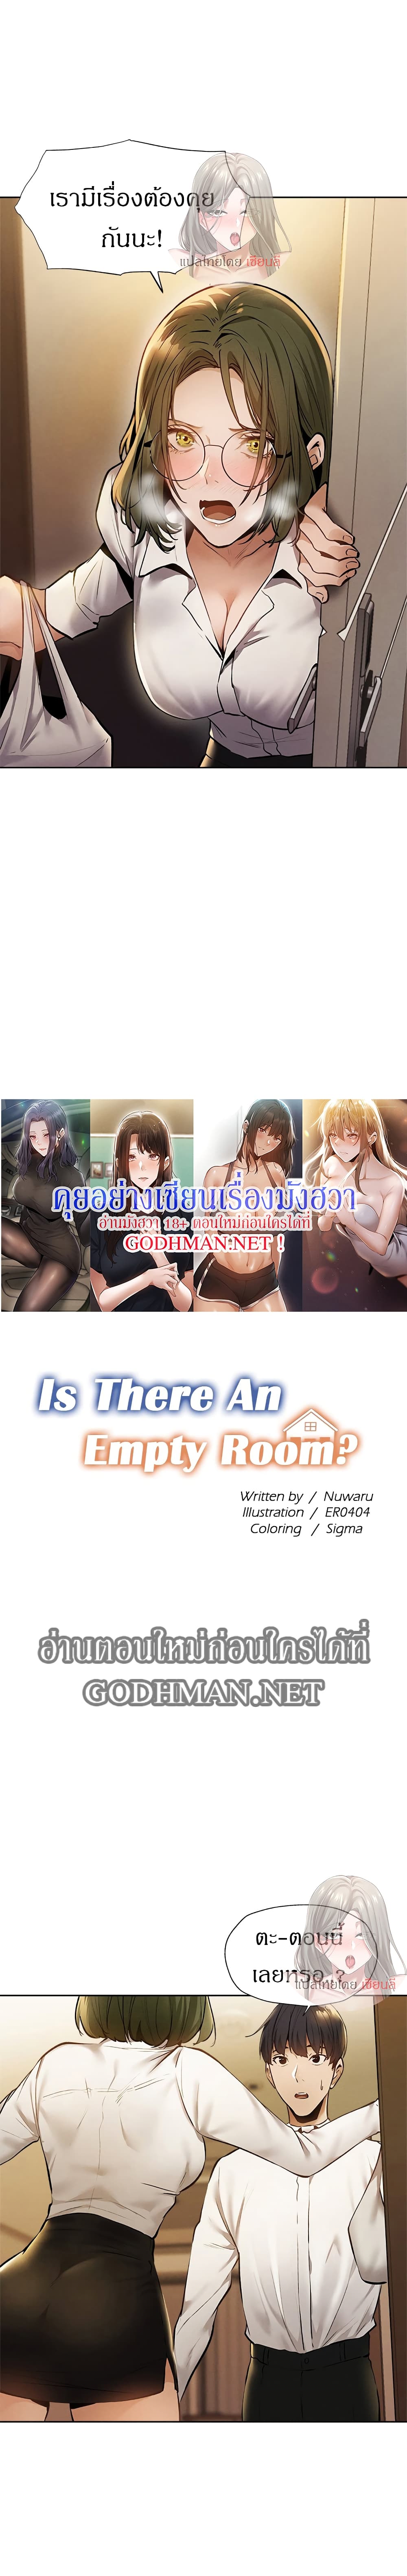 Is There an Em0pty Room 58 04